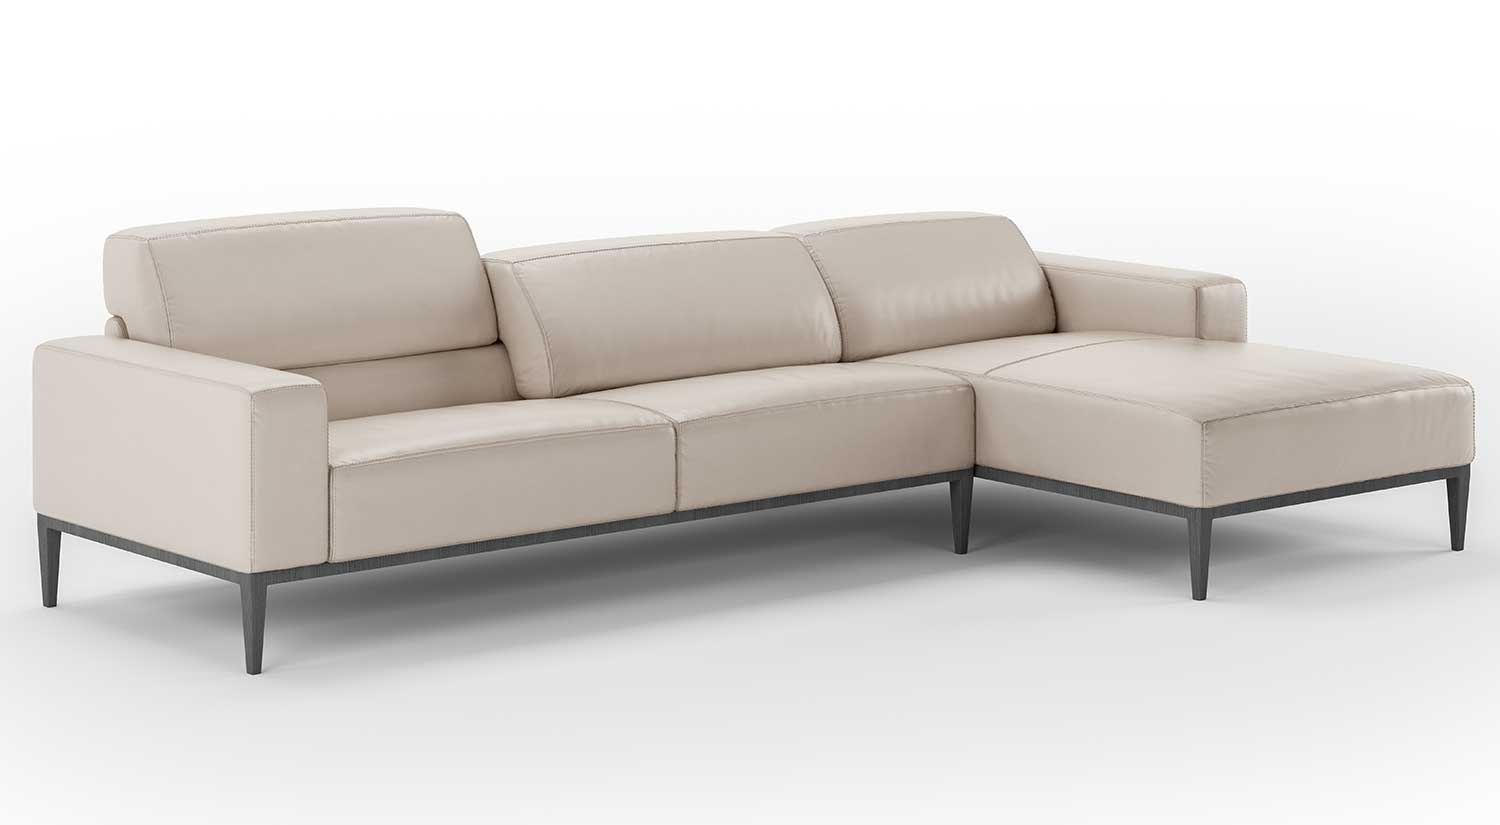 Ryker, american leather, sofa, sectional